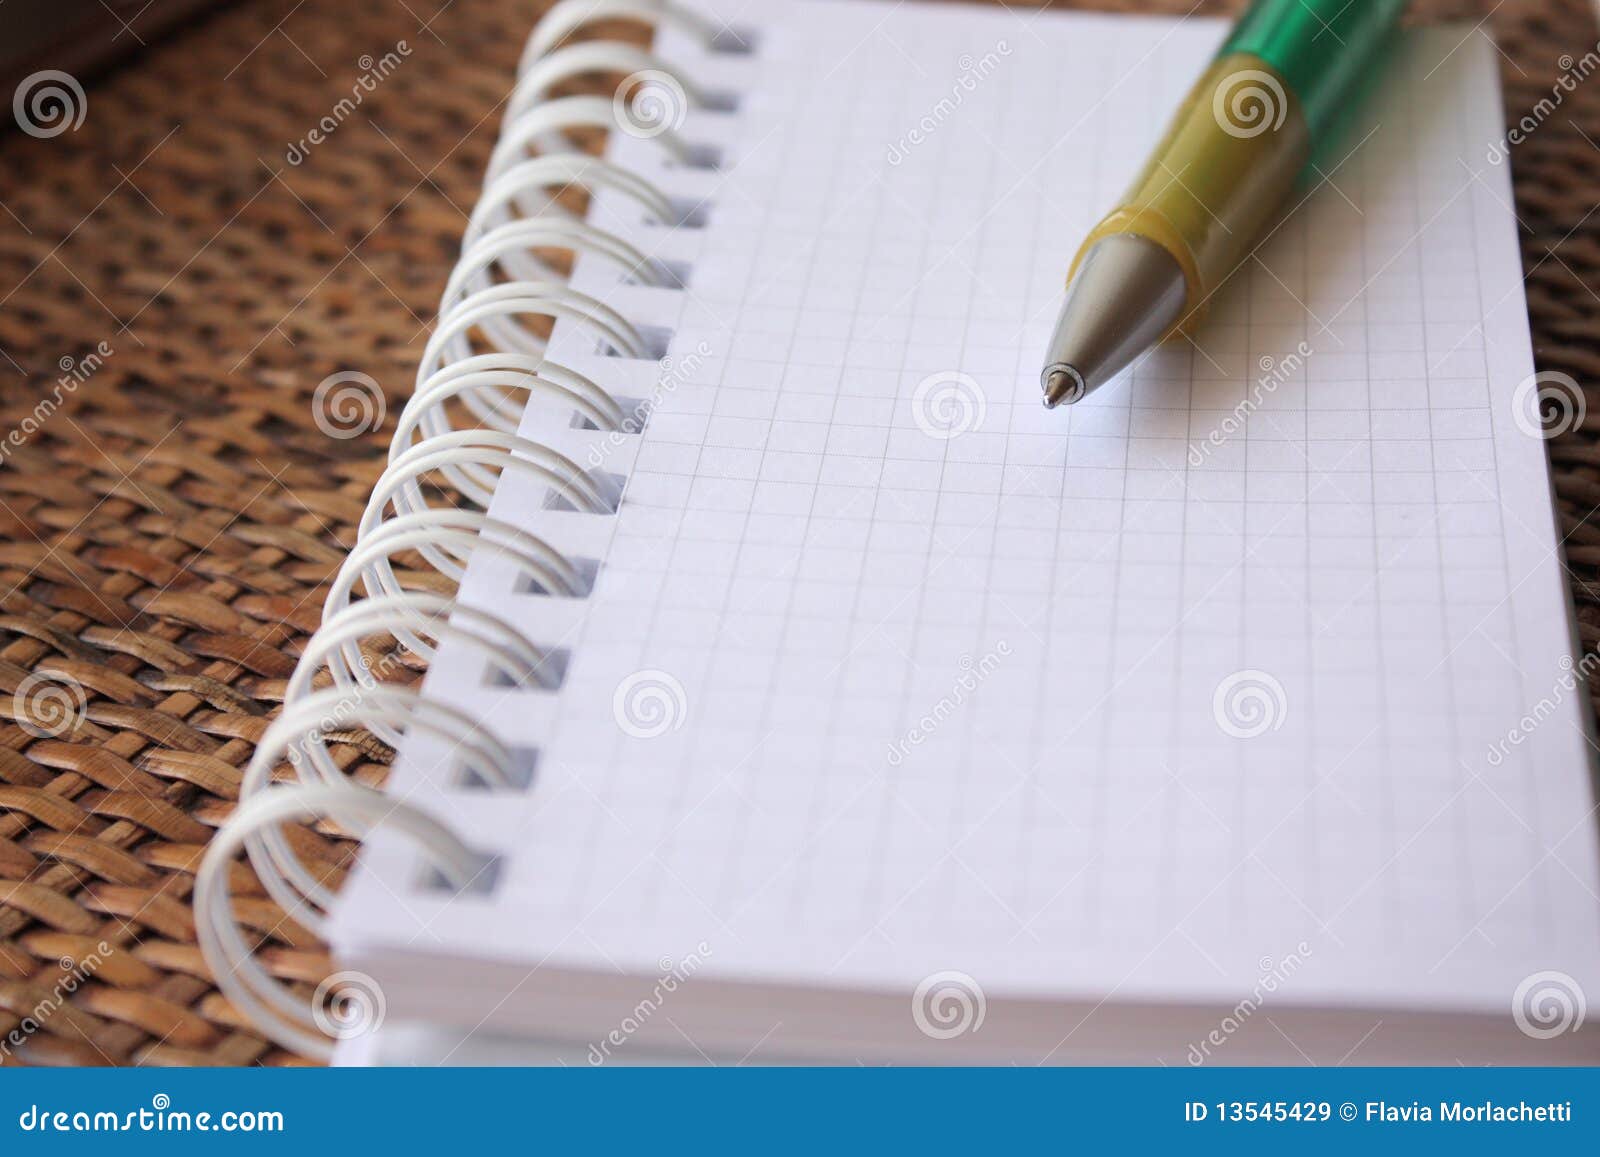 Spiral bound notebook with pen over rattan desk- shallow dof